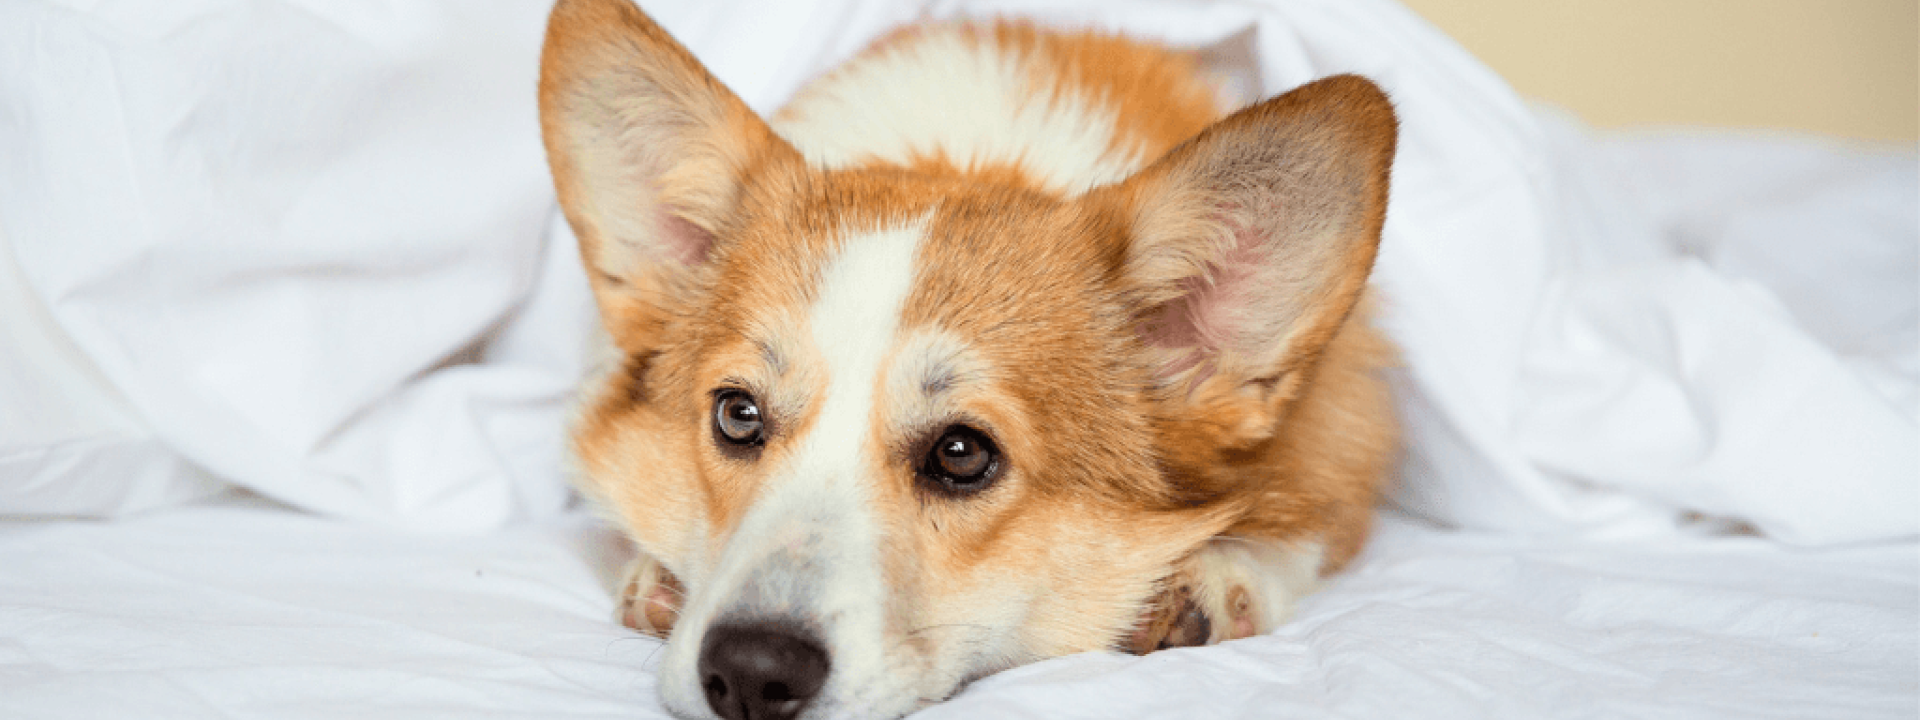 Corgi puppy lying on the bed under the covers and looking at the camera